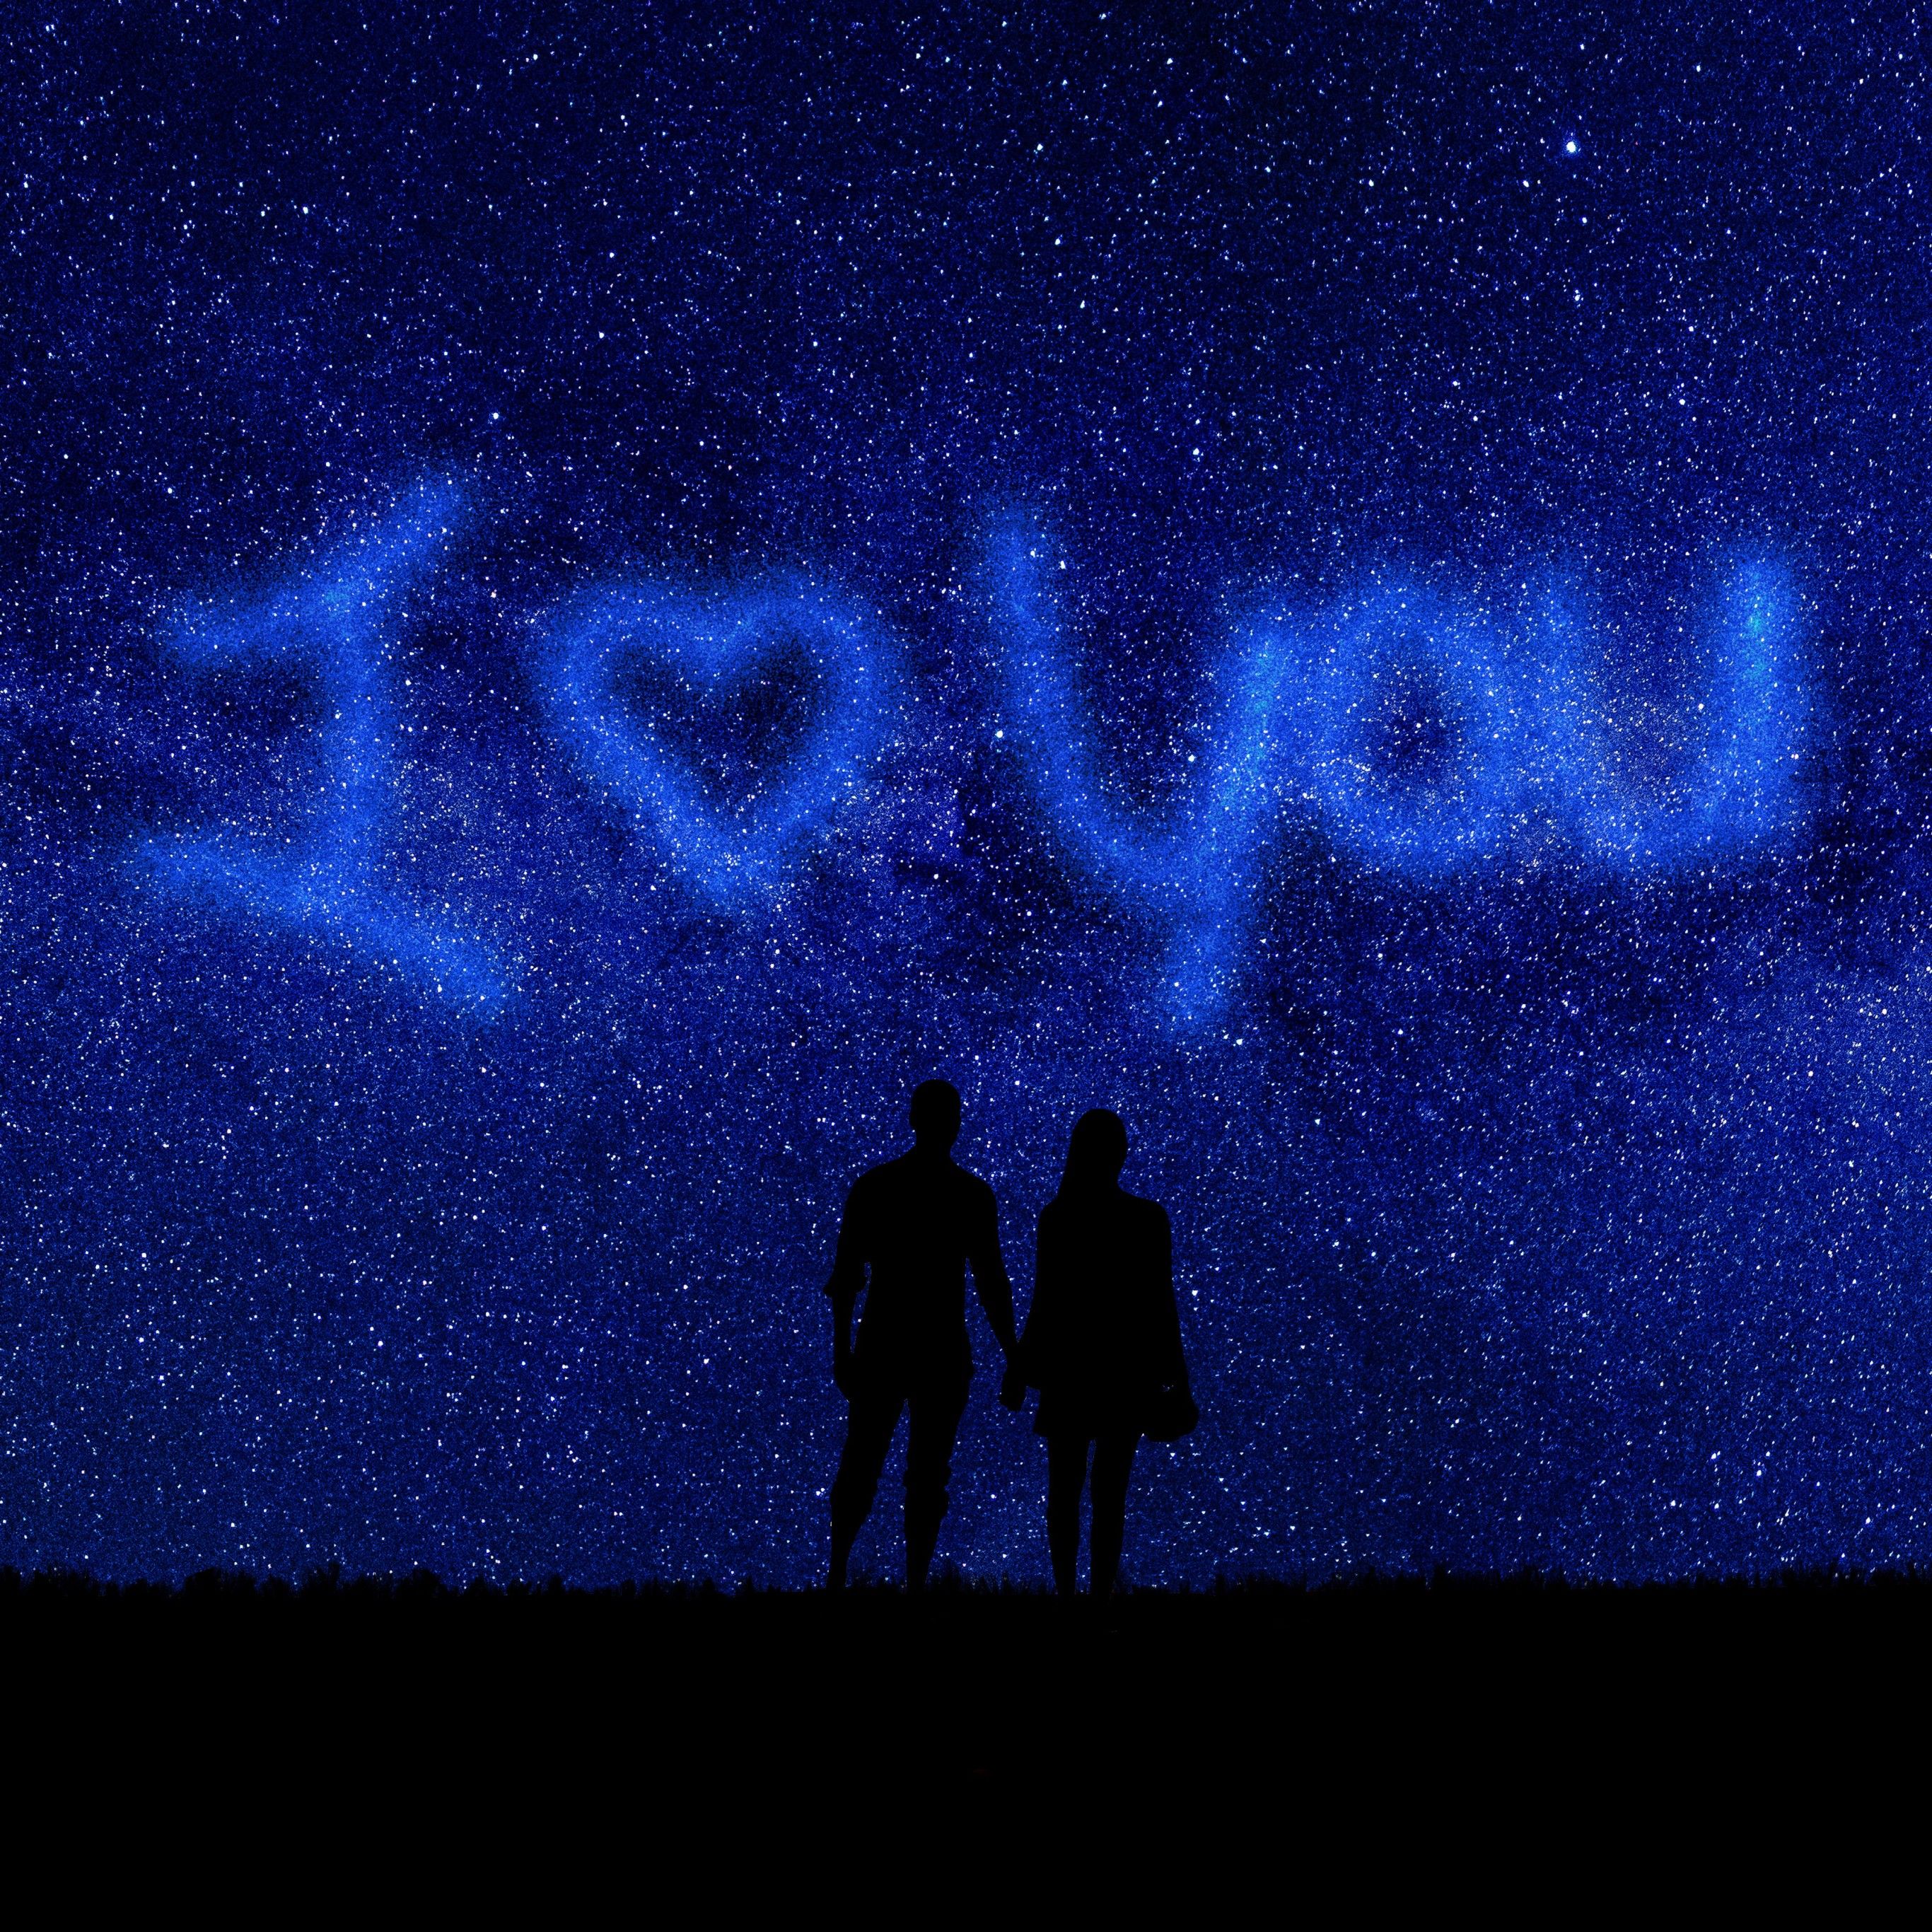 I Love You 4K Wallpaper, Starry sky, Couple, Silhouette, Heart shape, Valentines Day, Relationship, Love